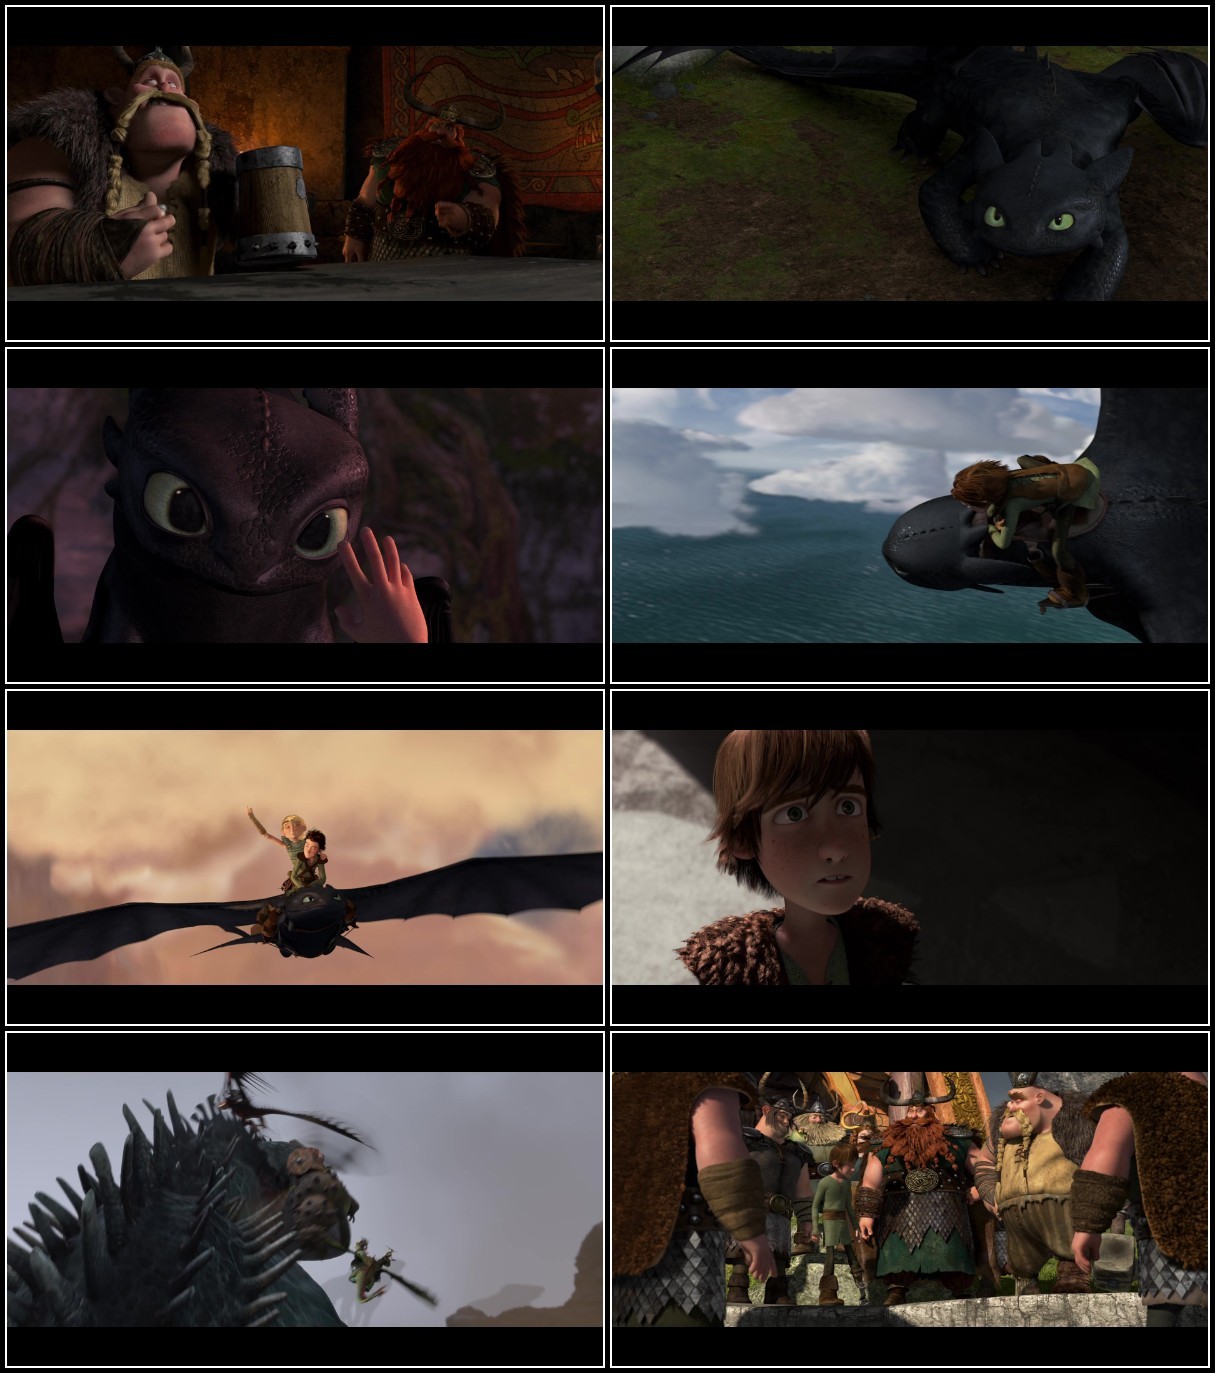 How To Train Your Dragon (2010) 1080p PCOK WEB-DL DDP 5 1 H 264-PiRaTeS 34pcv7U2_o